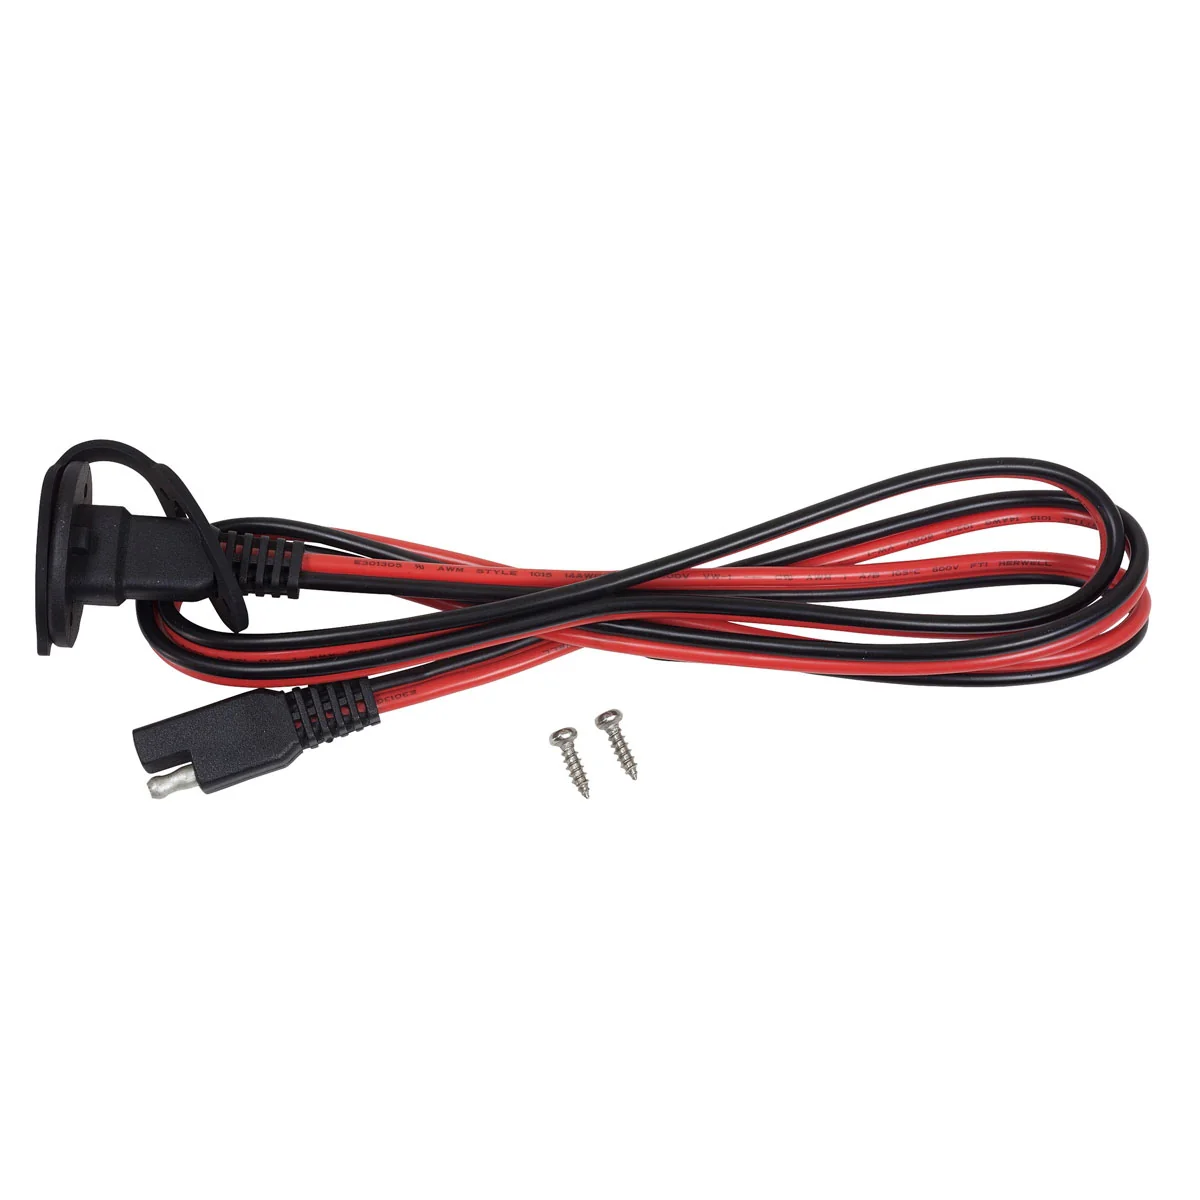 Can get this 10awg Y-adapter